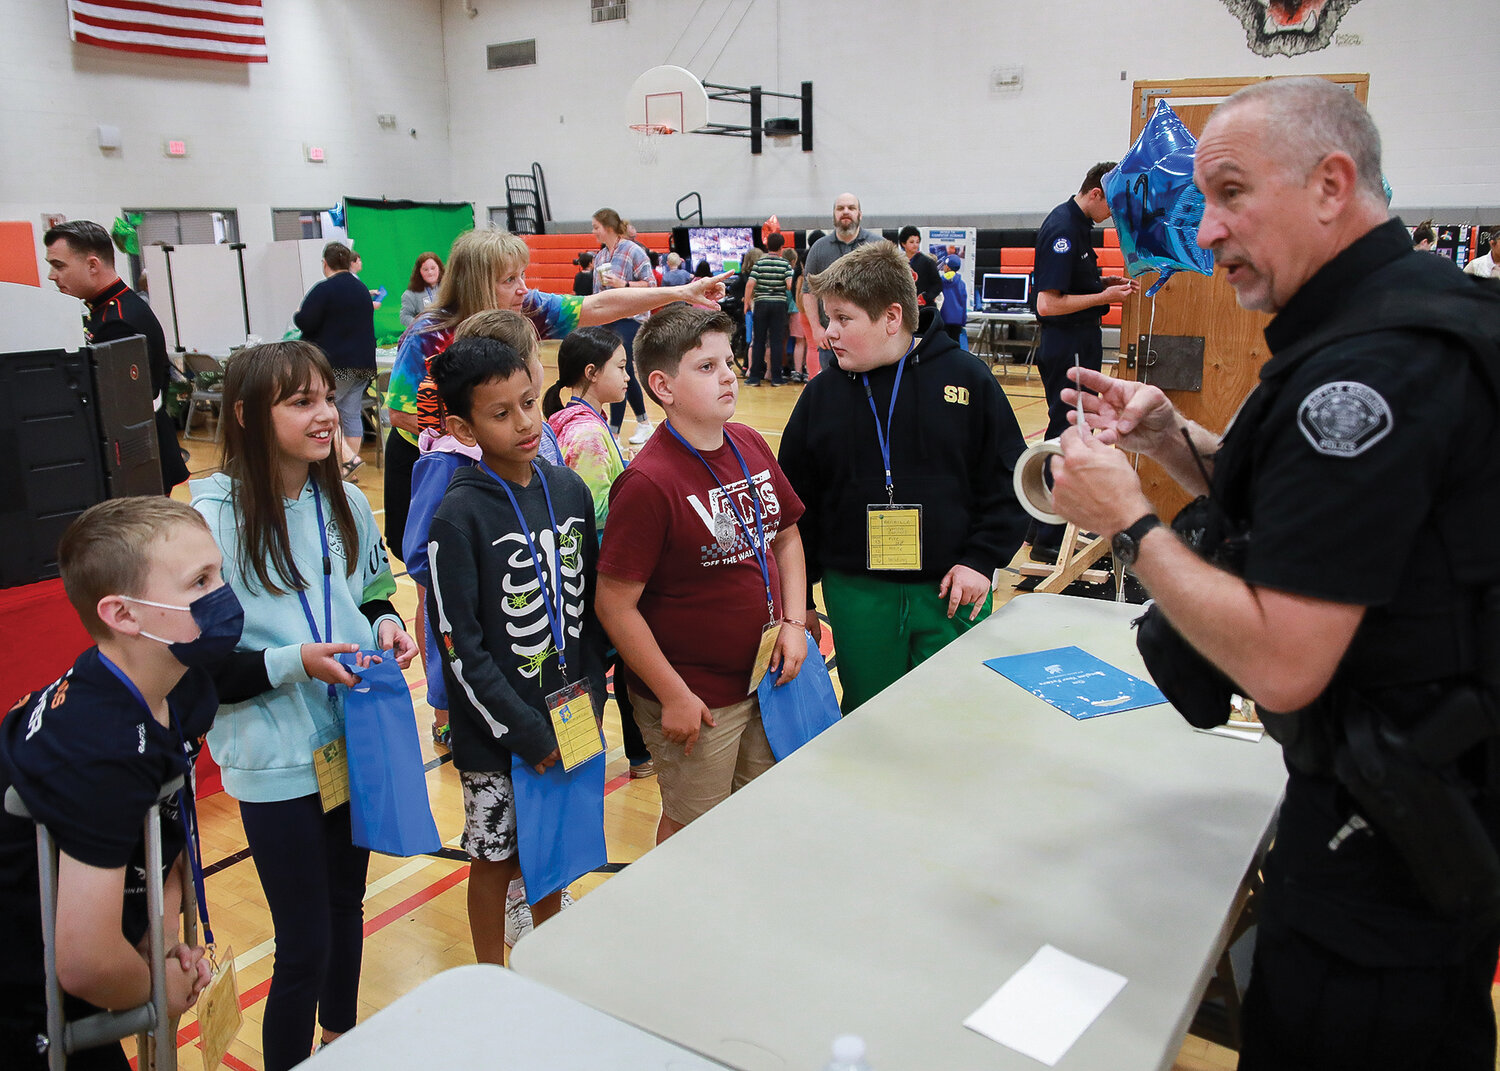 Students receive police badge stickers and information from Battle Ground’s school resource officer Phil Anderson at the fourth grade career fair at Battle Ground High School on Tuesday, May 30.